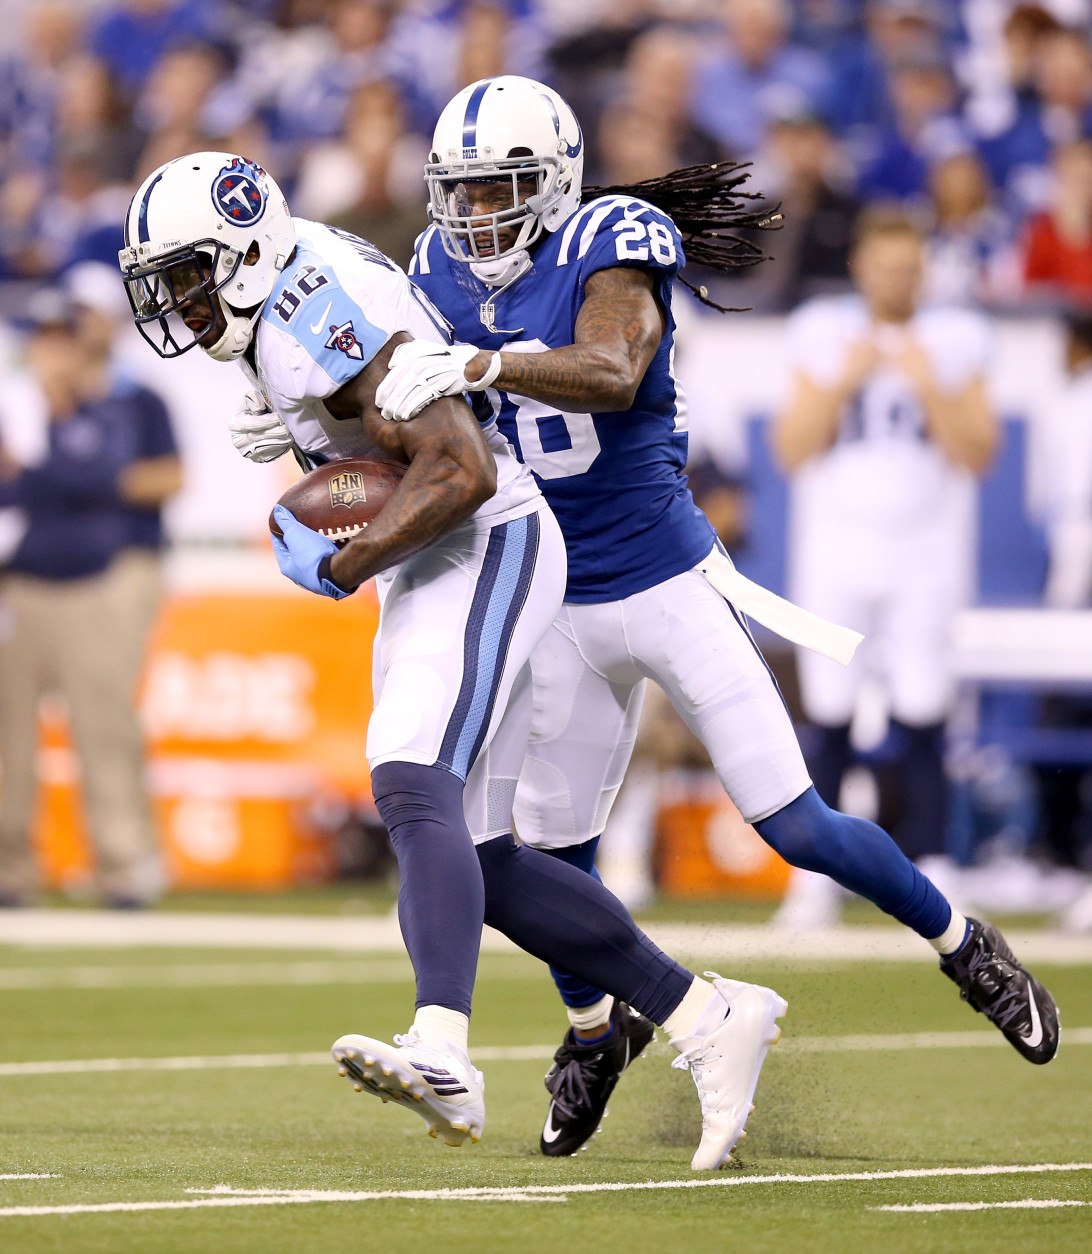 INDIANAPOLIS, IN - JANUARY 03:  Delanie Walker #82 of the Tennessee Titans is brought down by Greg Toler #28 of the Indianapolis Colts at Lucas Oil Stadium on January 3, 2016 in Indianapolis, Indiana.  (Photo by Andy Lyons/Getty Images)